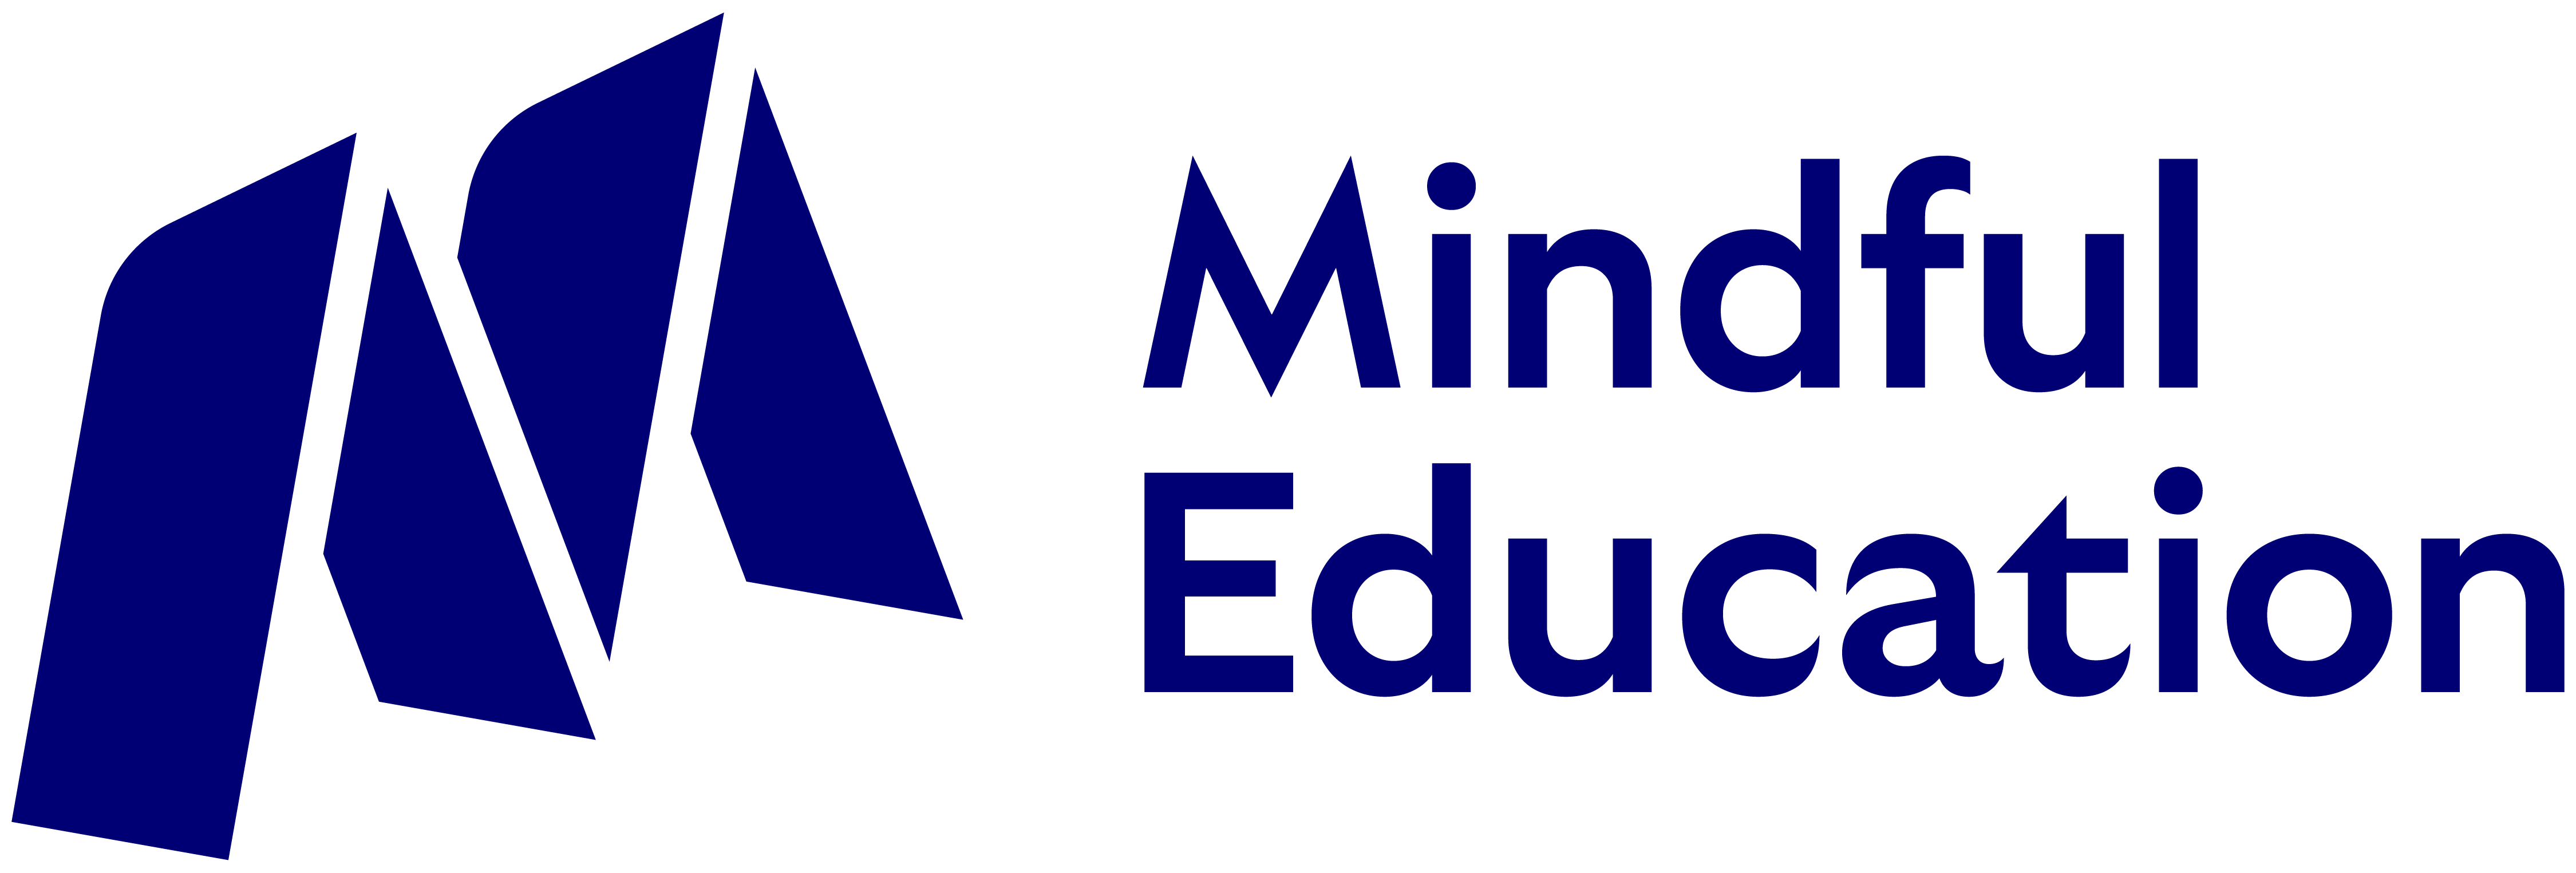 Copy of Mindful Education Assets Logos RGB 01